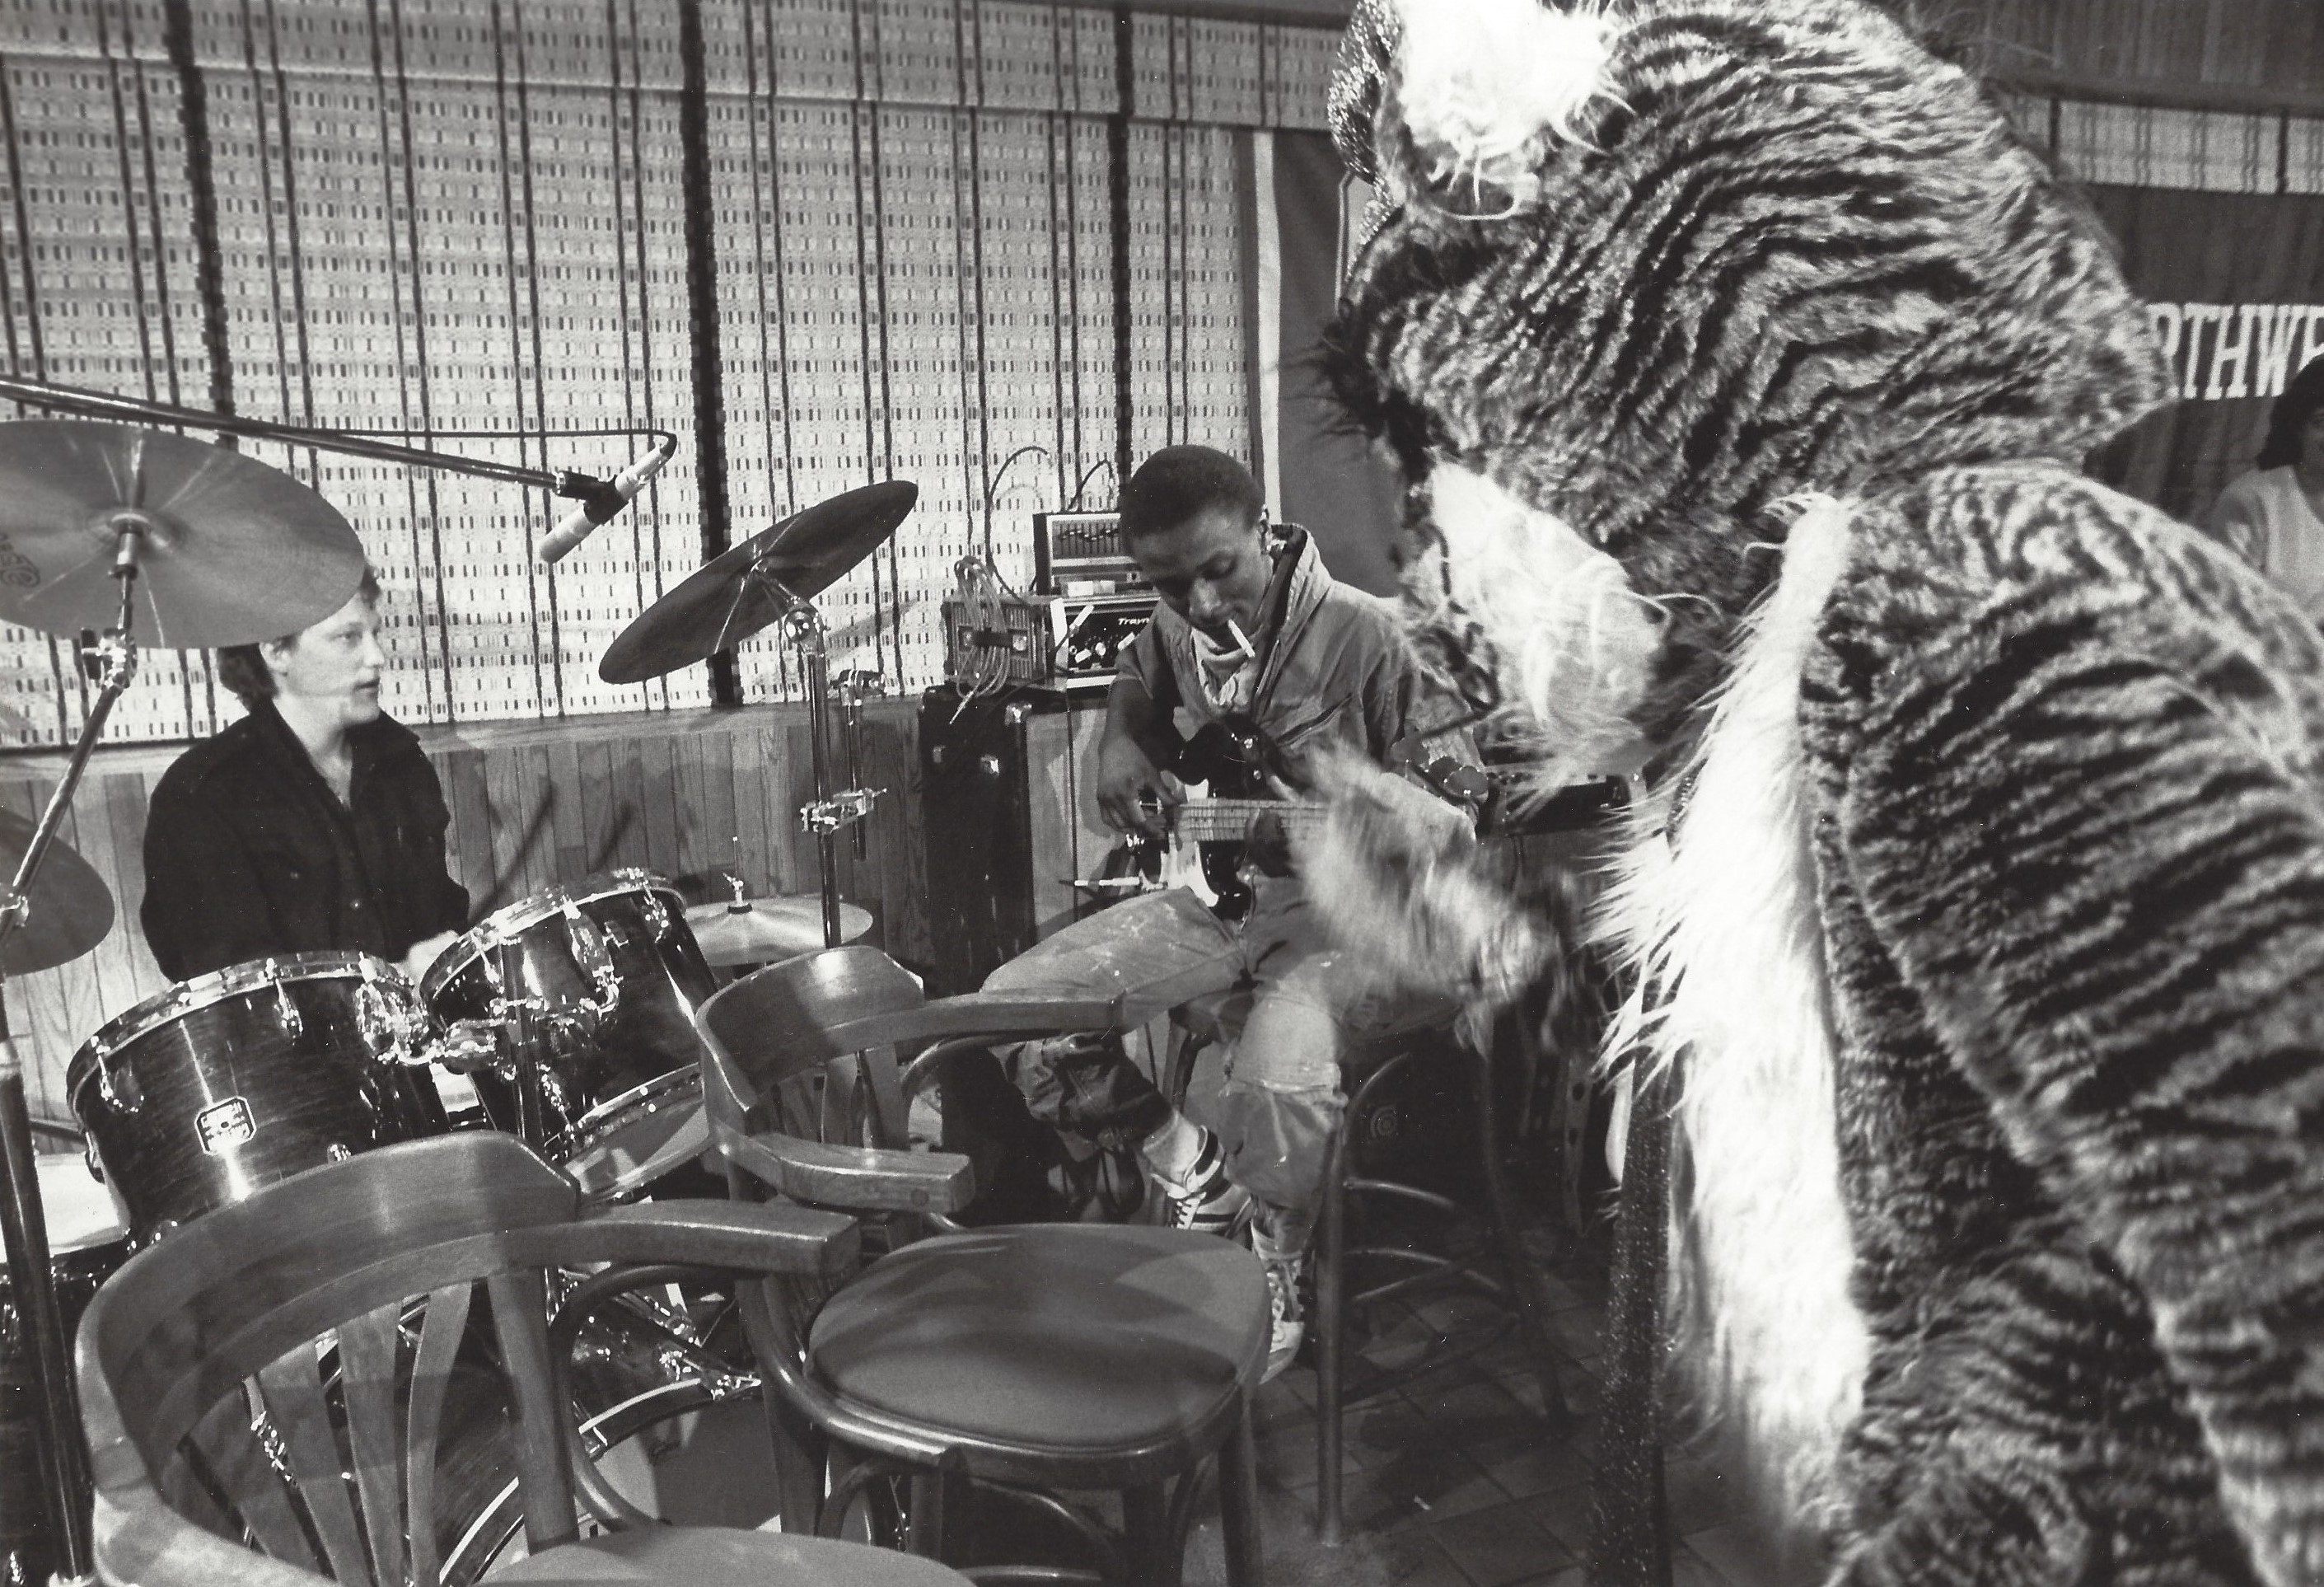 Ed, Kevin, and Willie the Wildcat share a moment between takes.